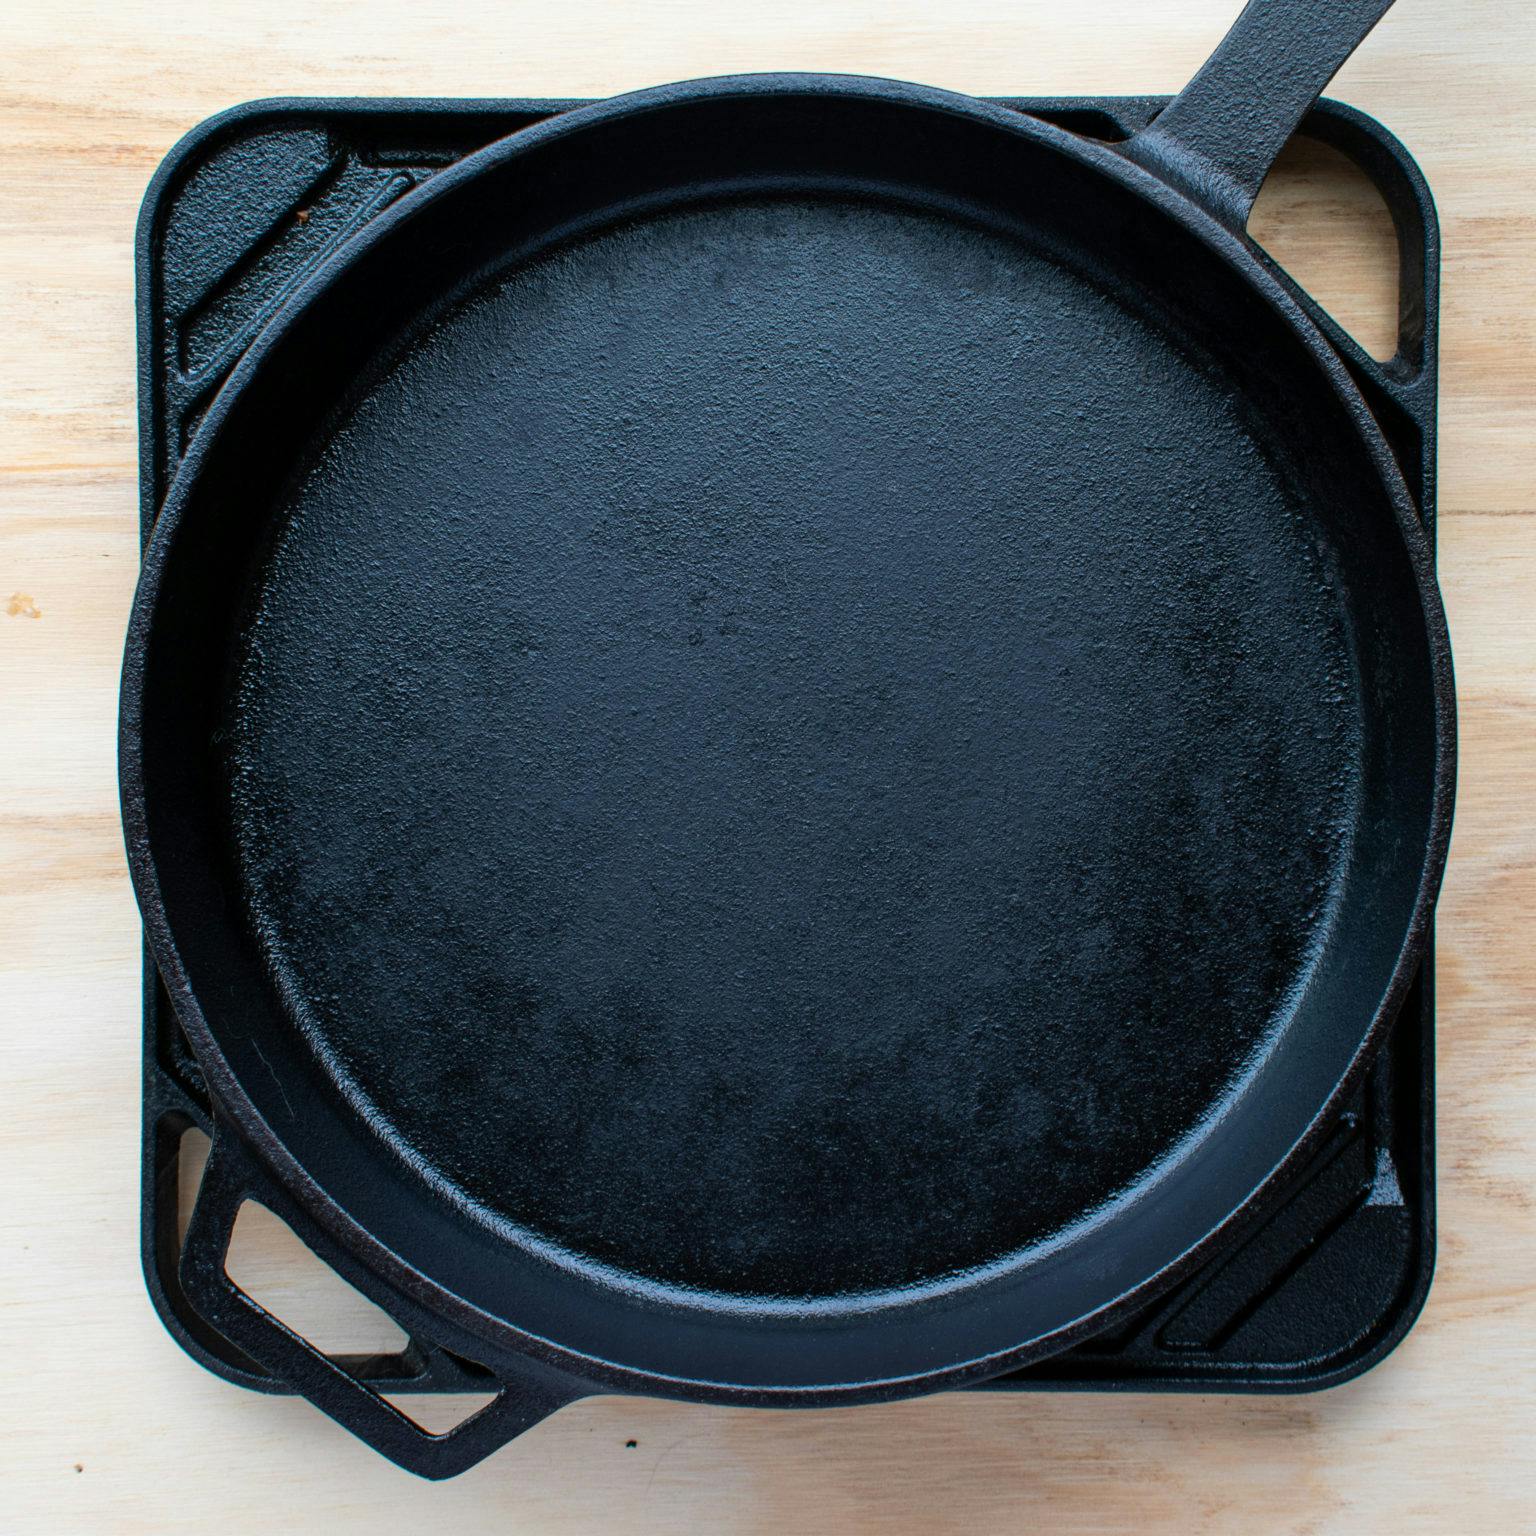 Cover with weight, such as a cast iron